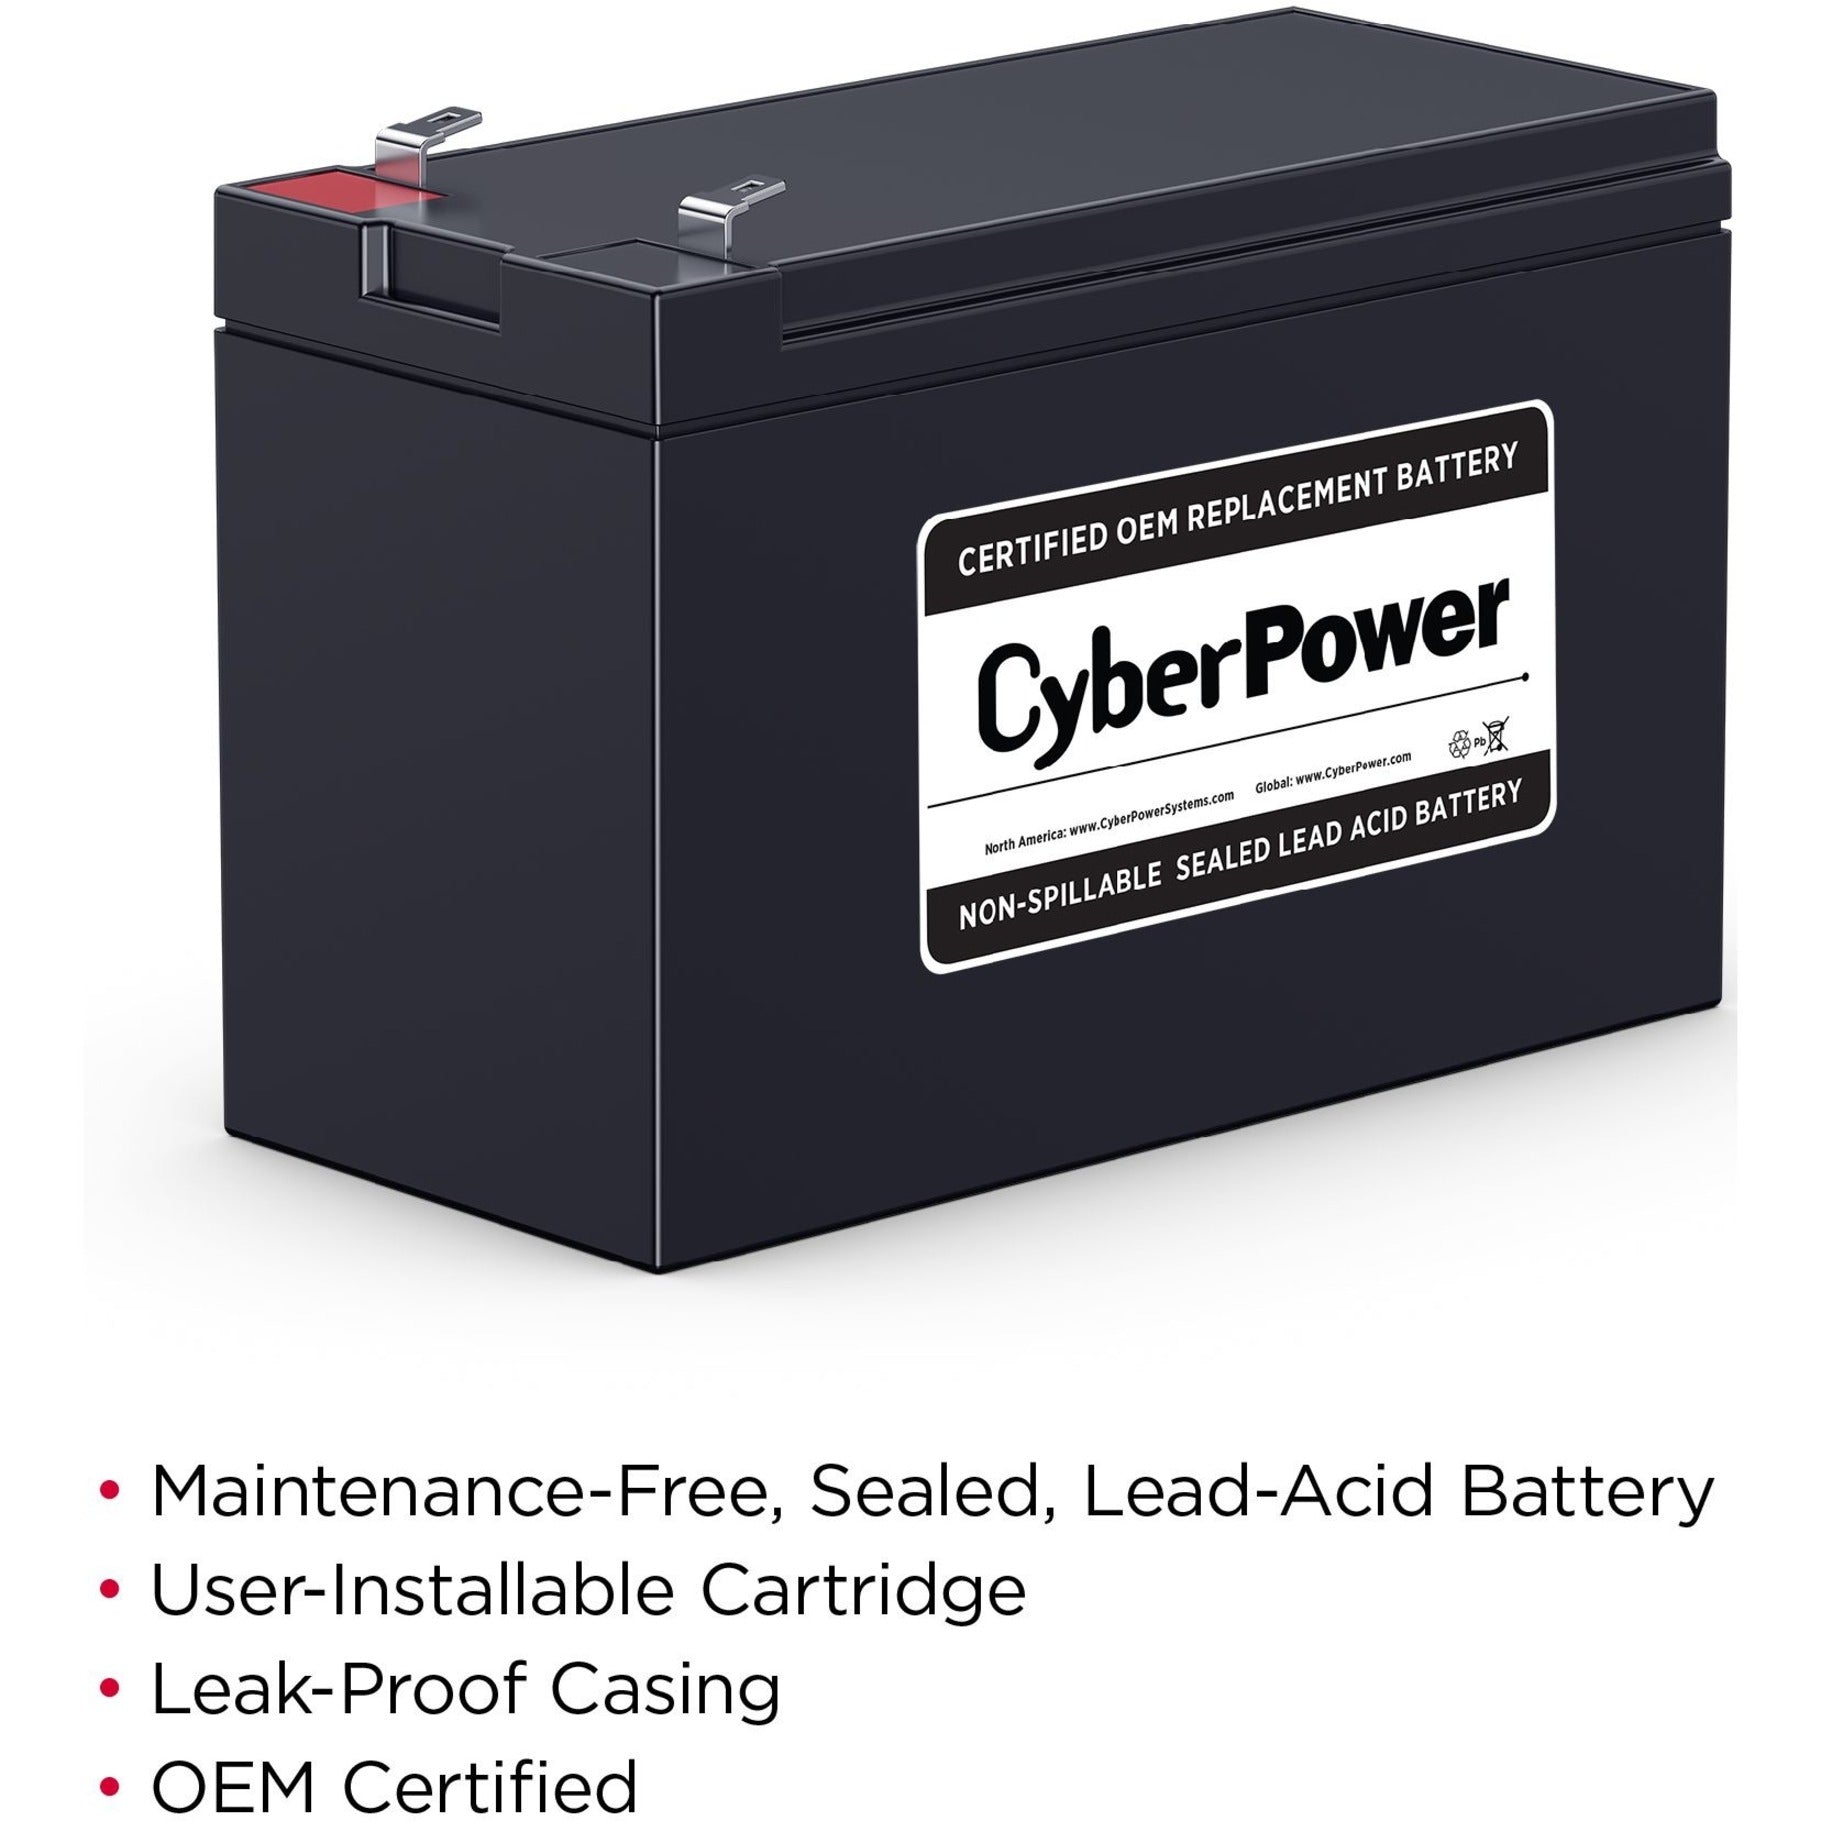 CyberPower RB1280 UPS Replacement Battery Cartridge, 18 Month Warranty, 12V DC, 8000mAh, Lead Acid, Maintenance-free